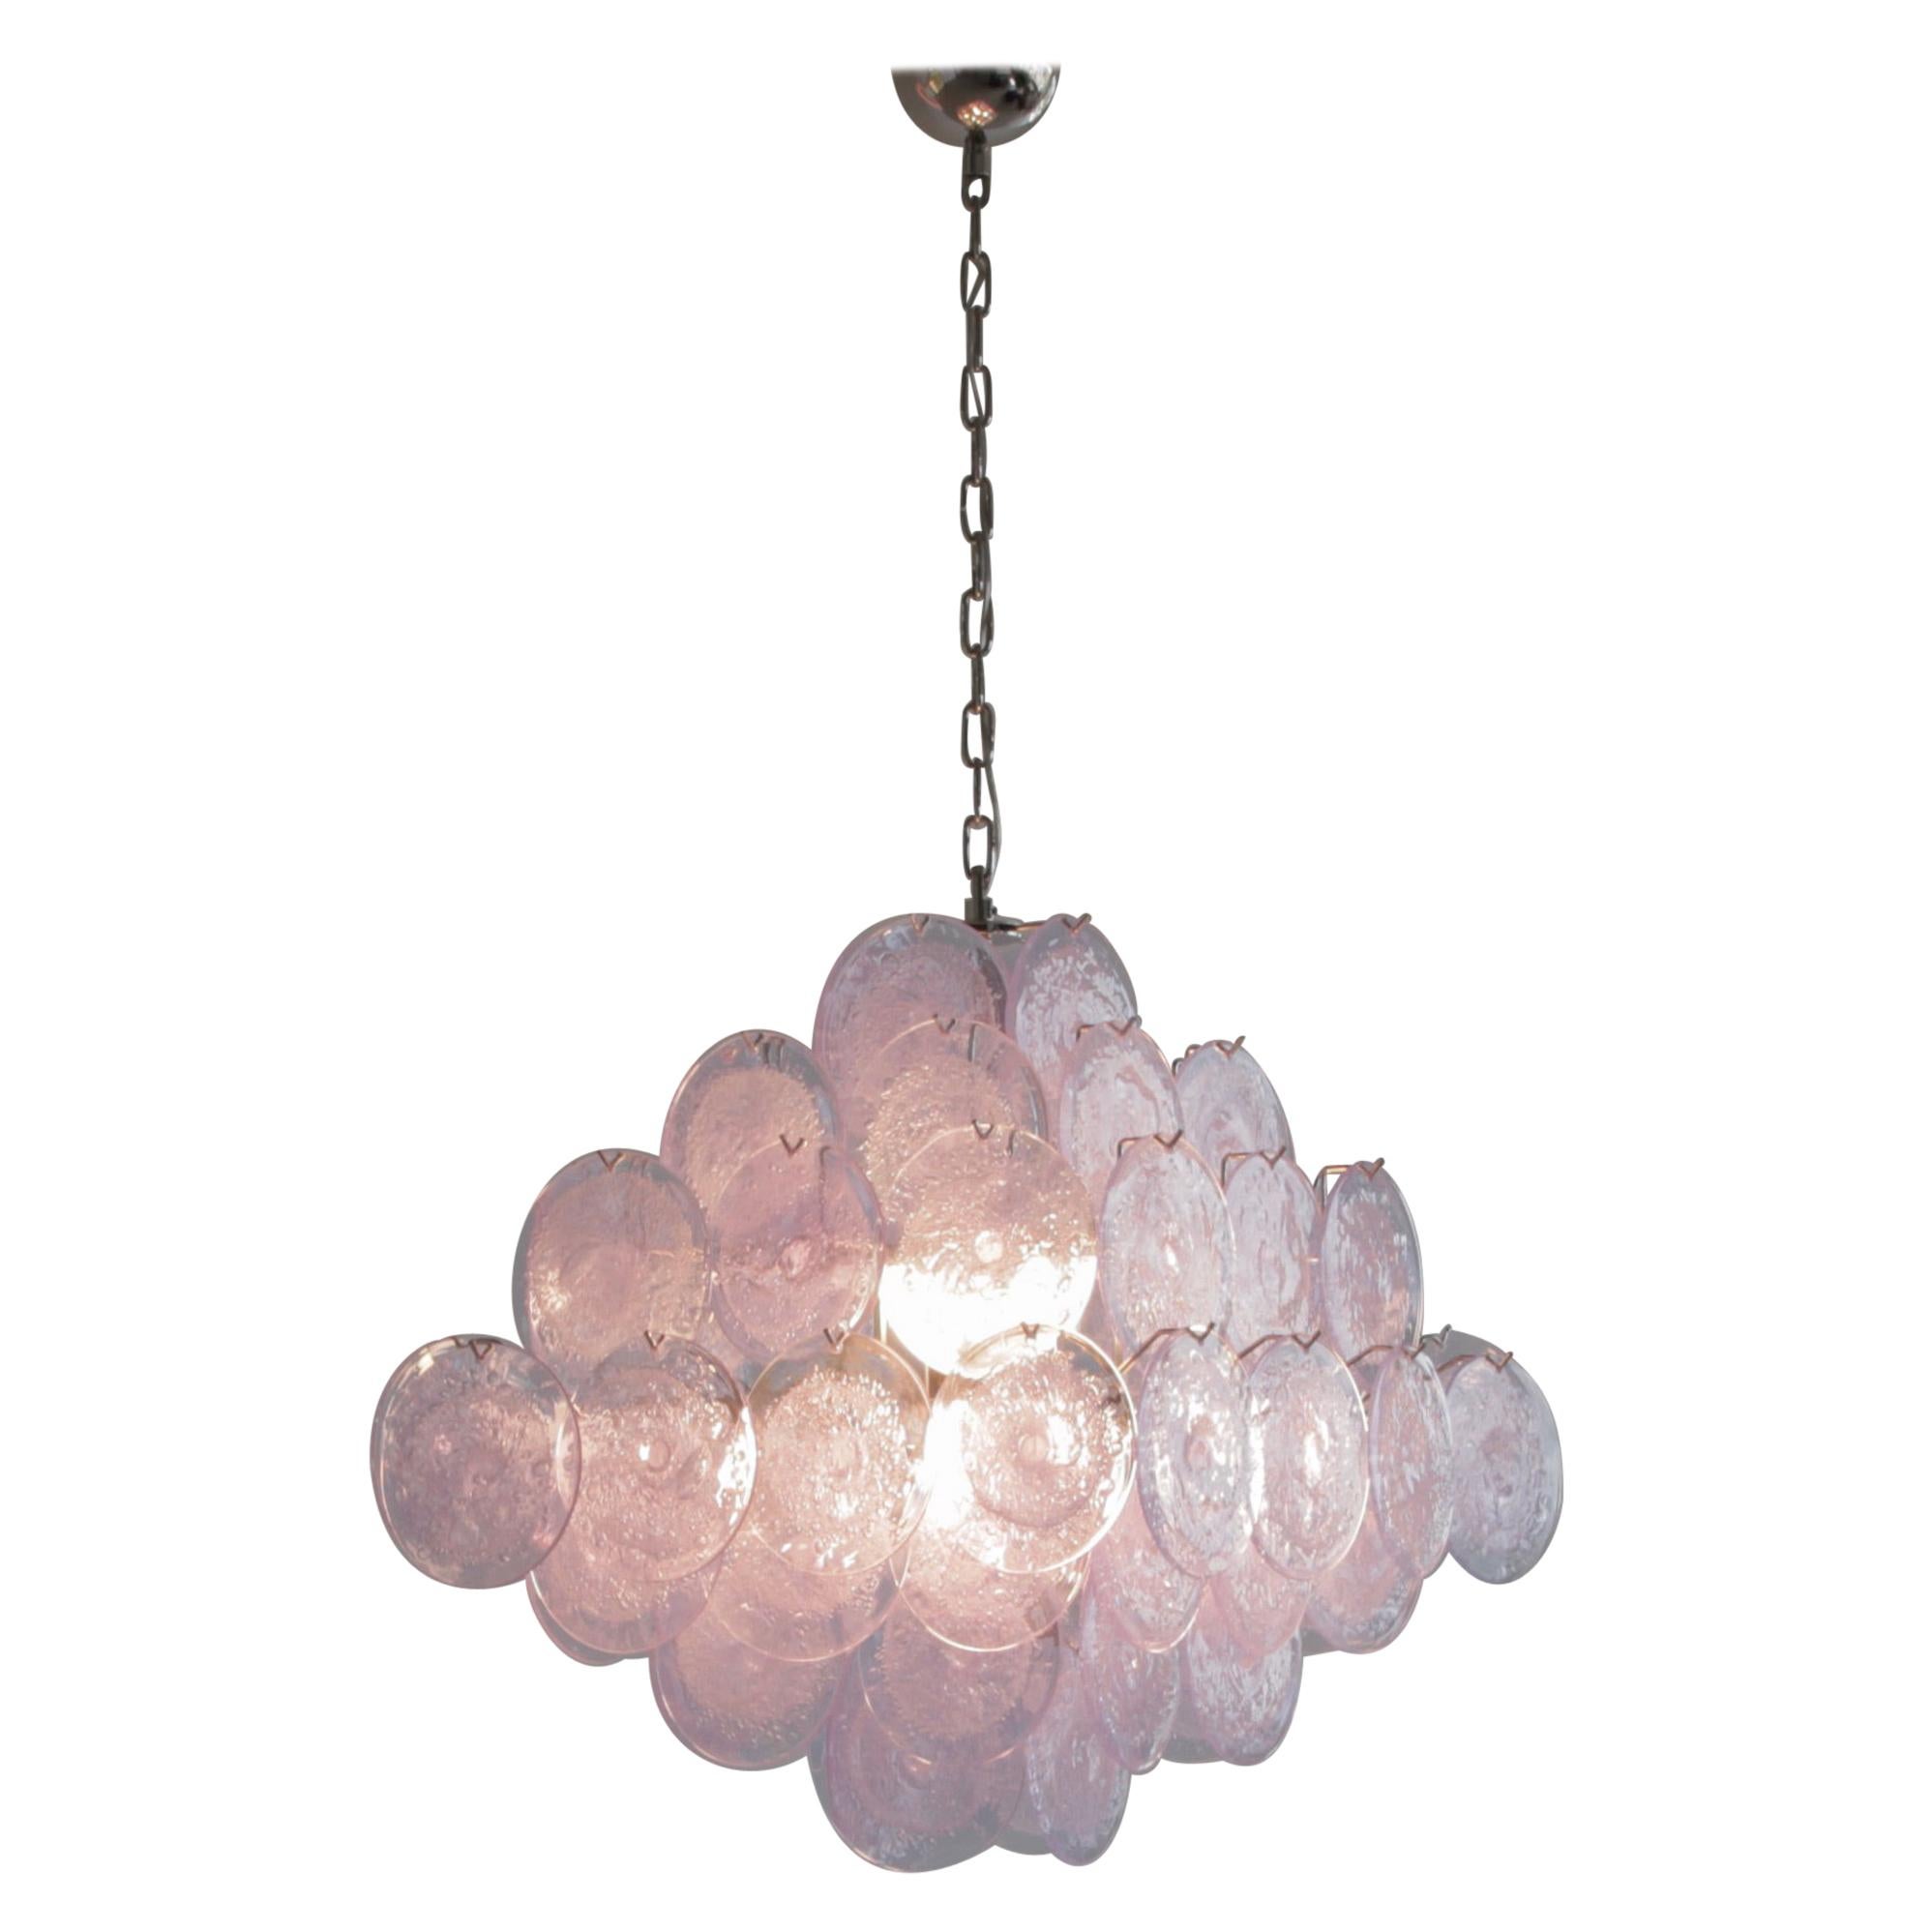 Murano Glass Chandelier with Lavender Coloured Glass Disks